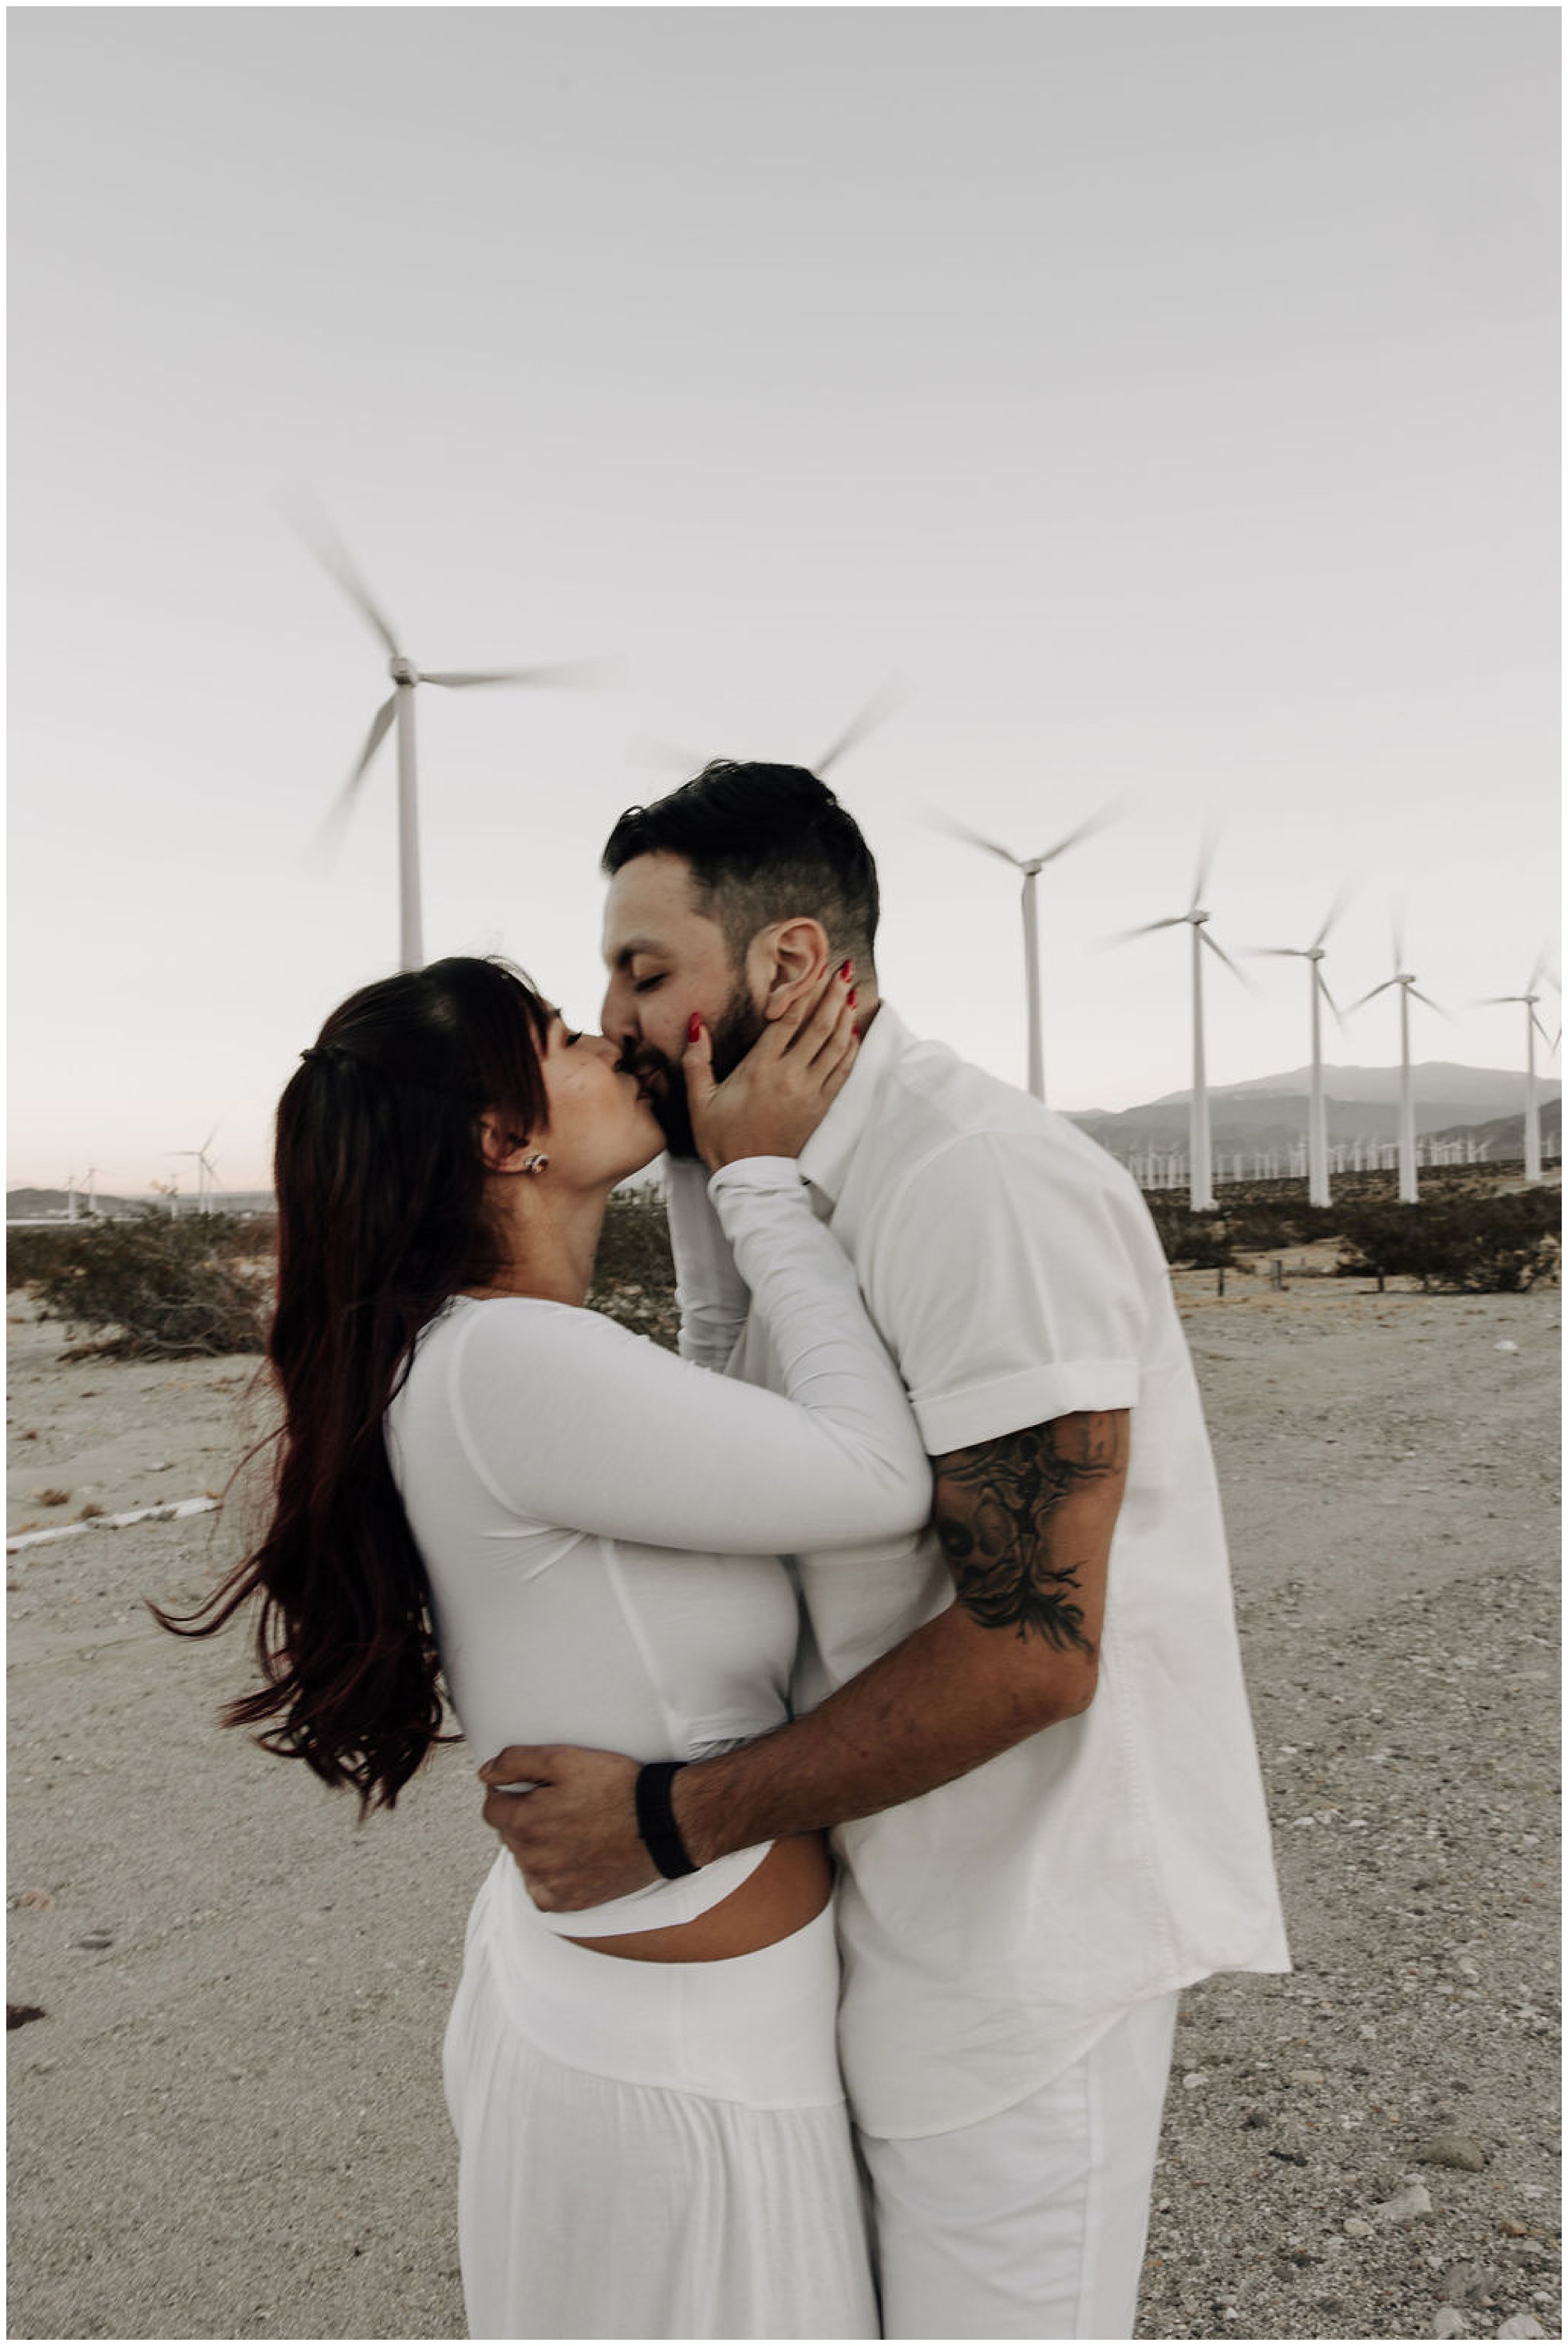 couple kissing by windmills